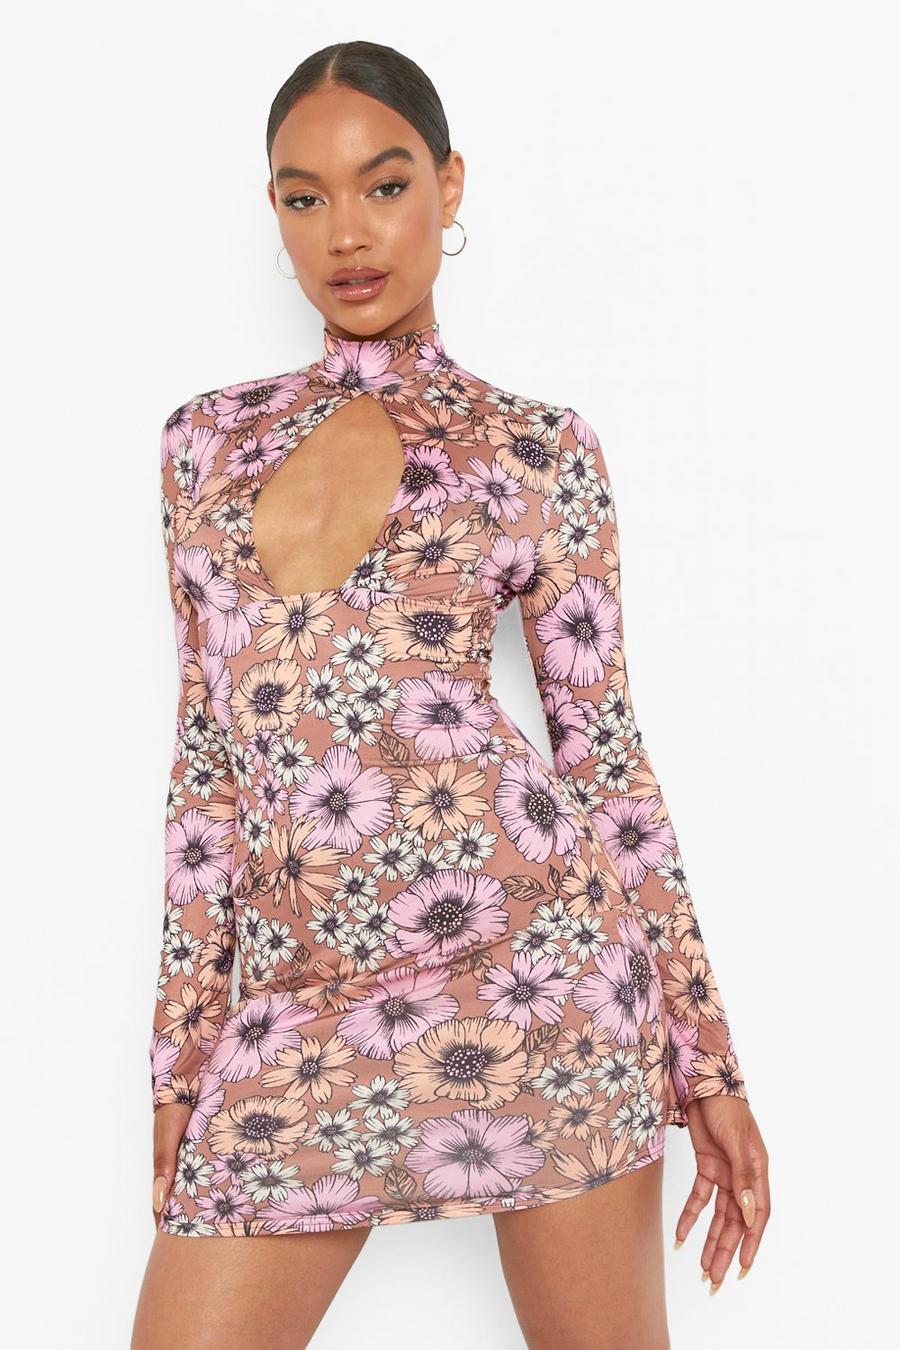 Tan Slinky 70's Floral Print Cut Out Mini Dress image number 1